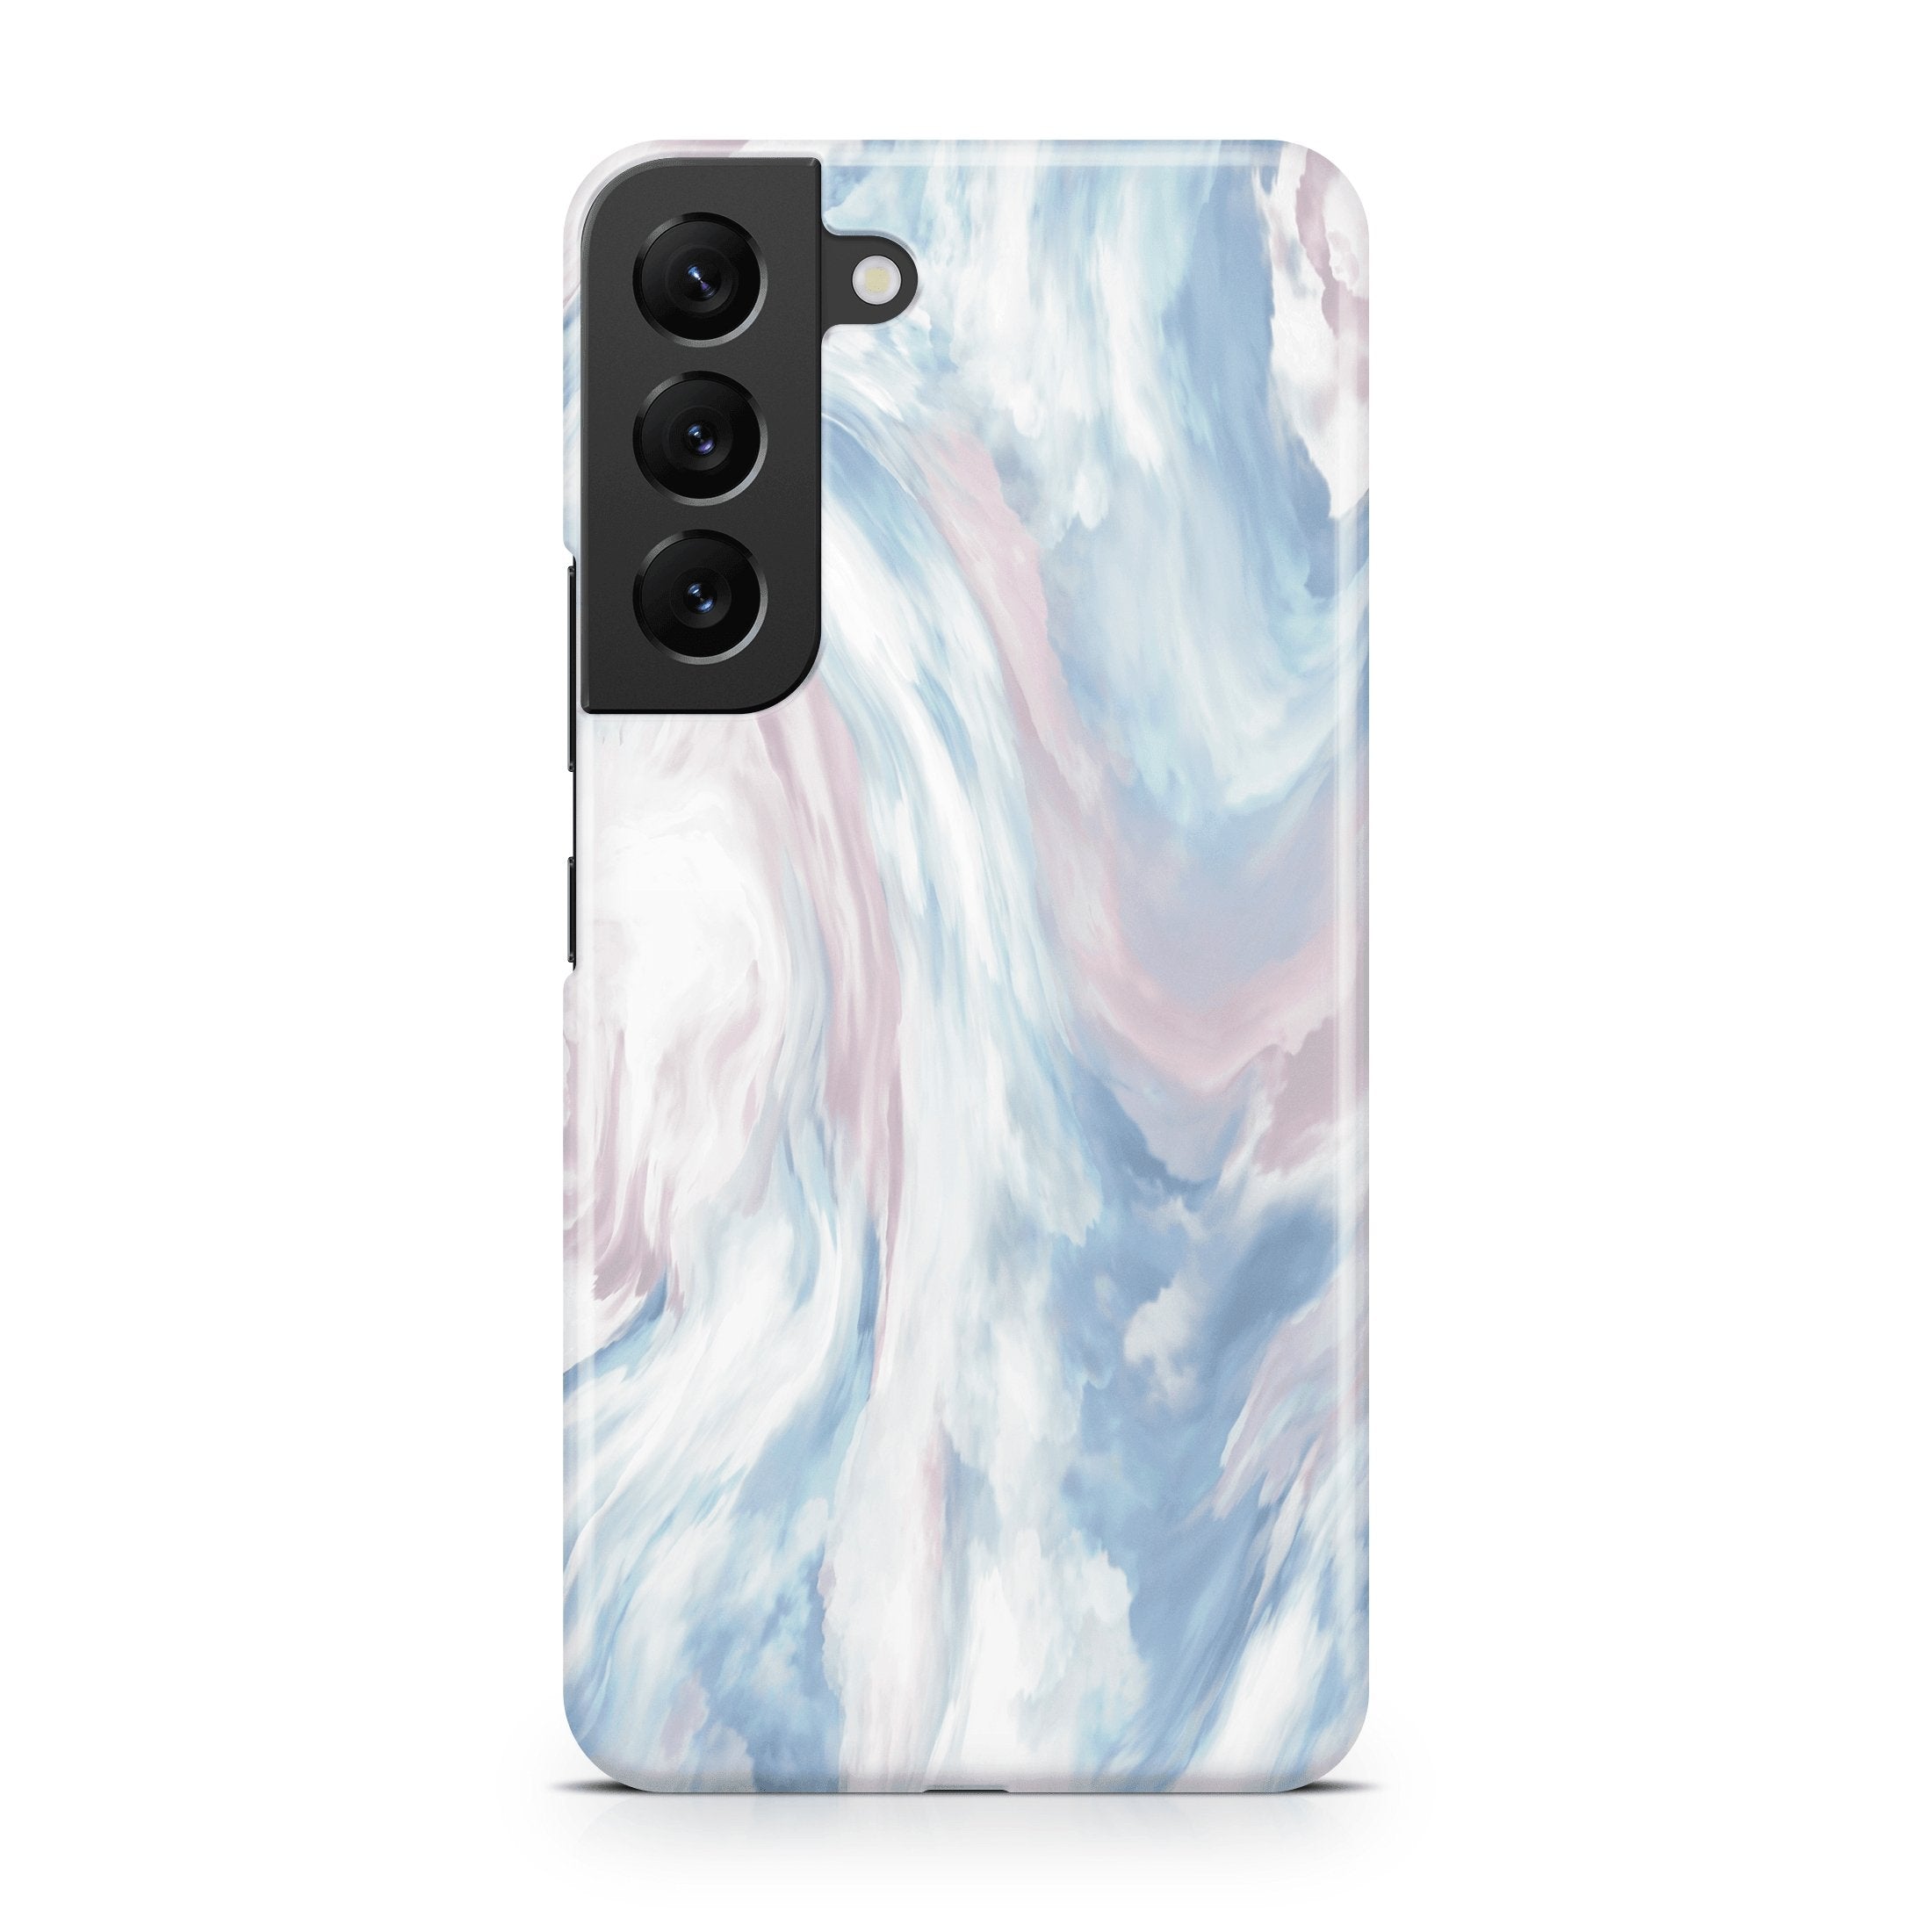 Winter Water - Samsung phone case designs by CaseSwagger